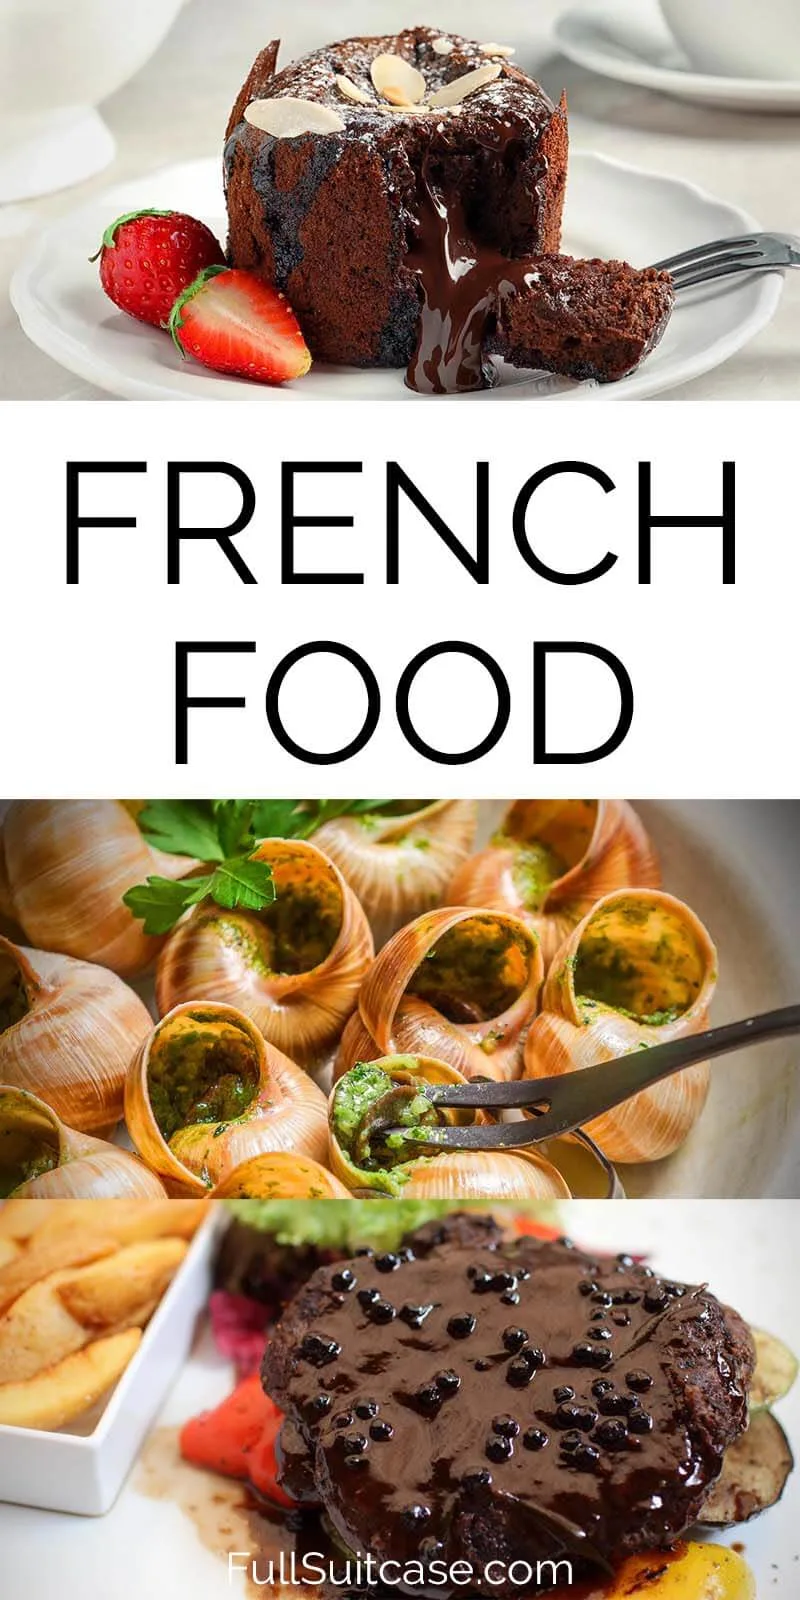 French food - complete guide to the best traditional French dishes